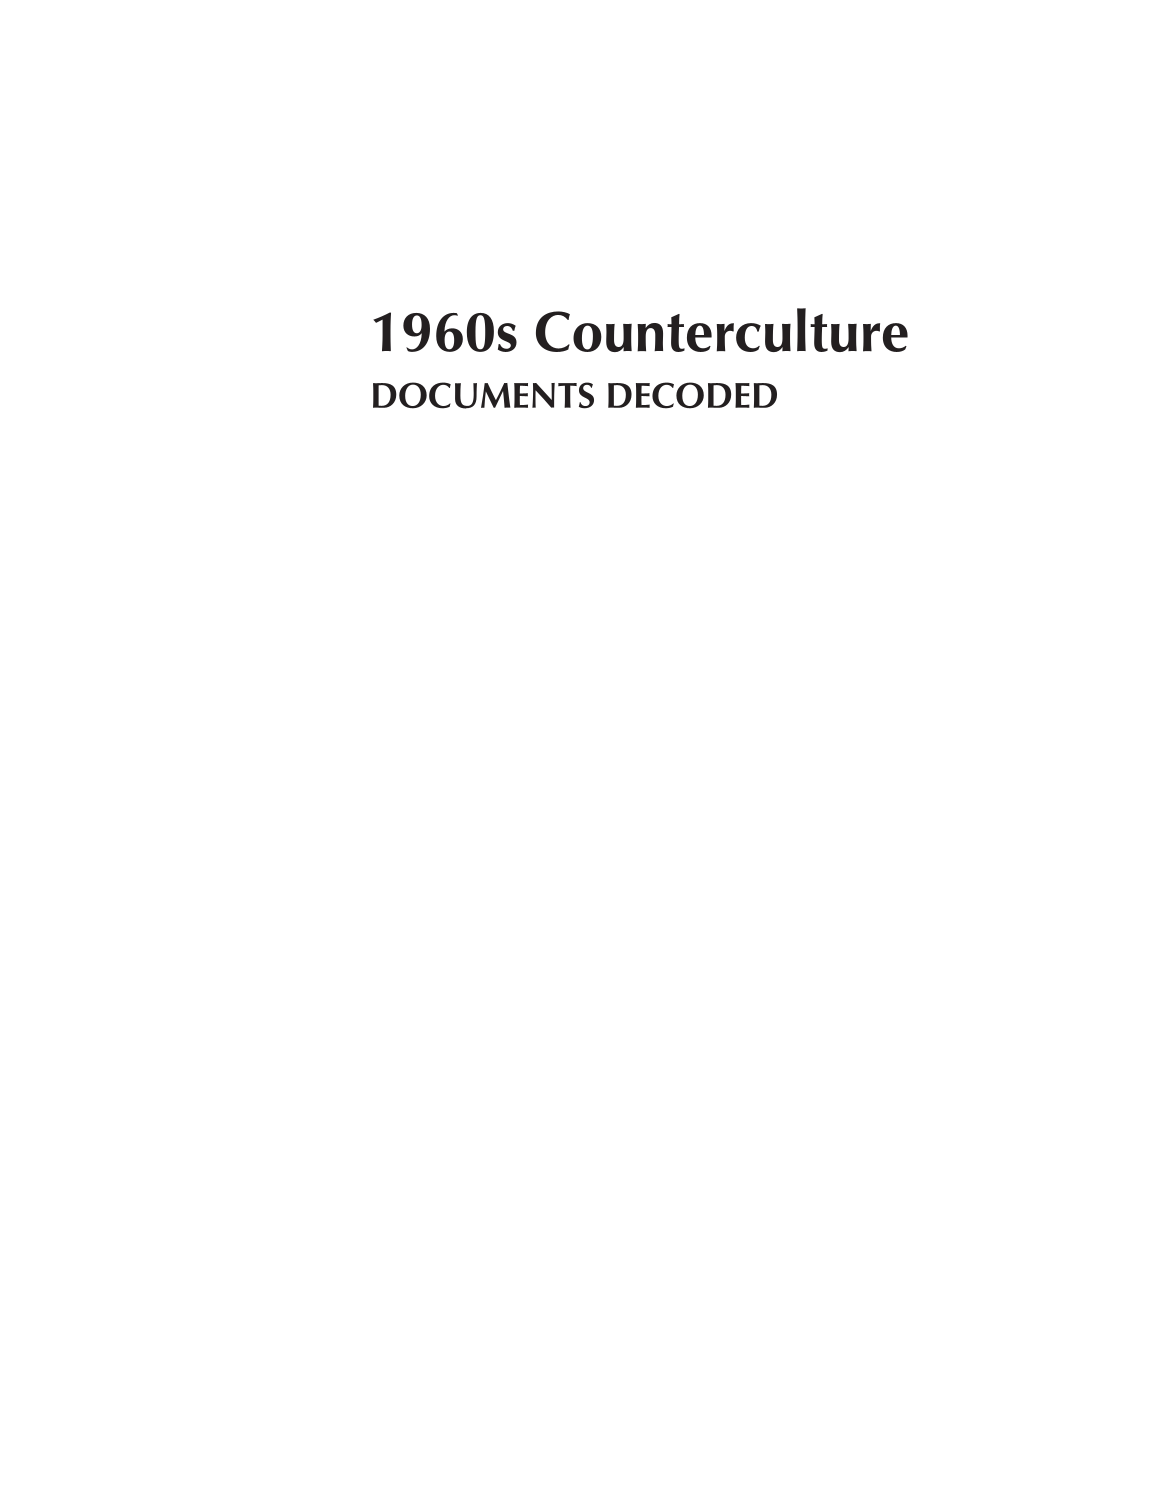 1960s Counterculture: Documents Decoded page i